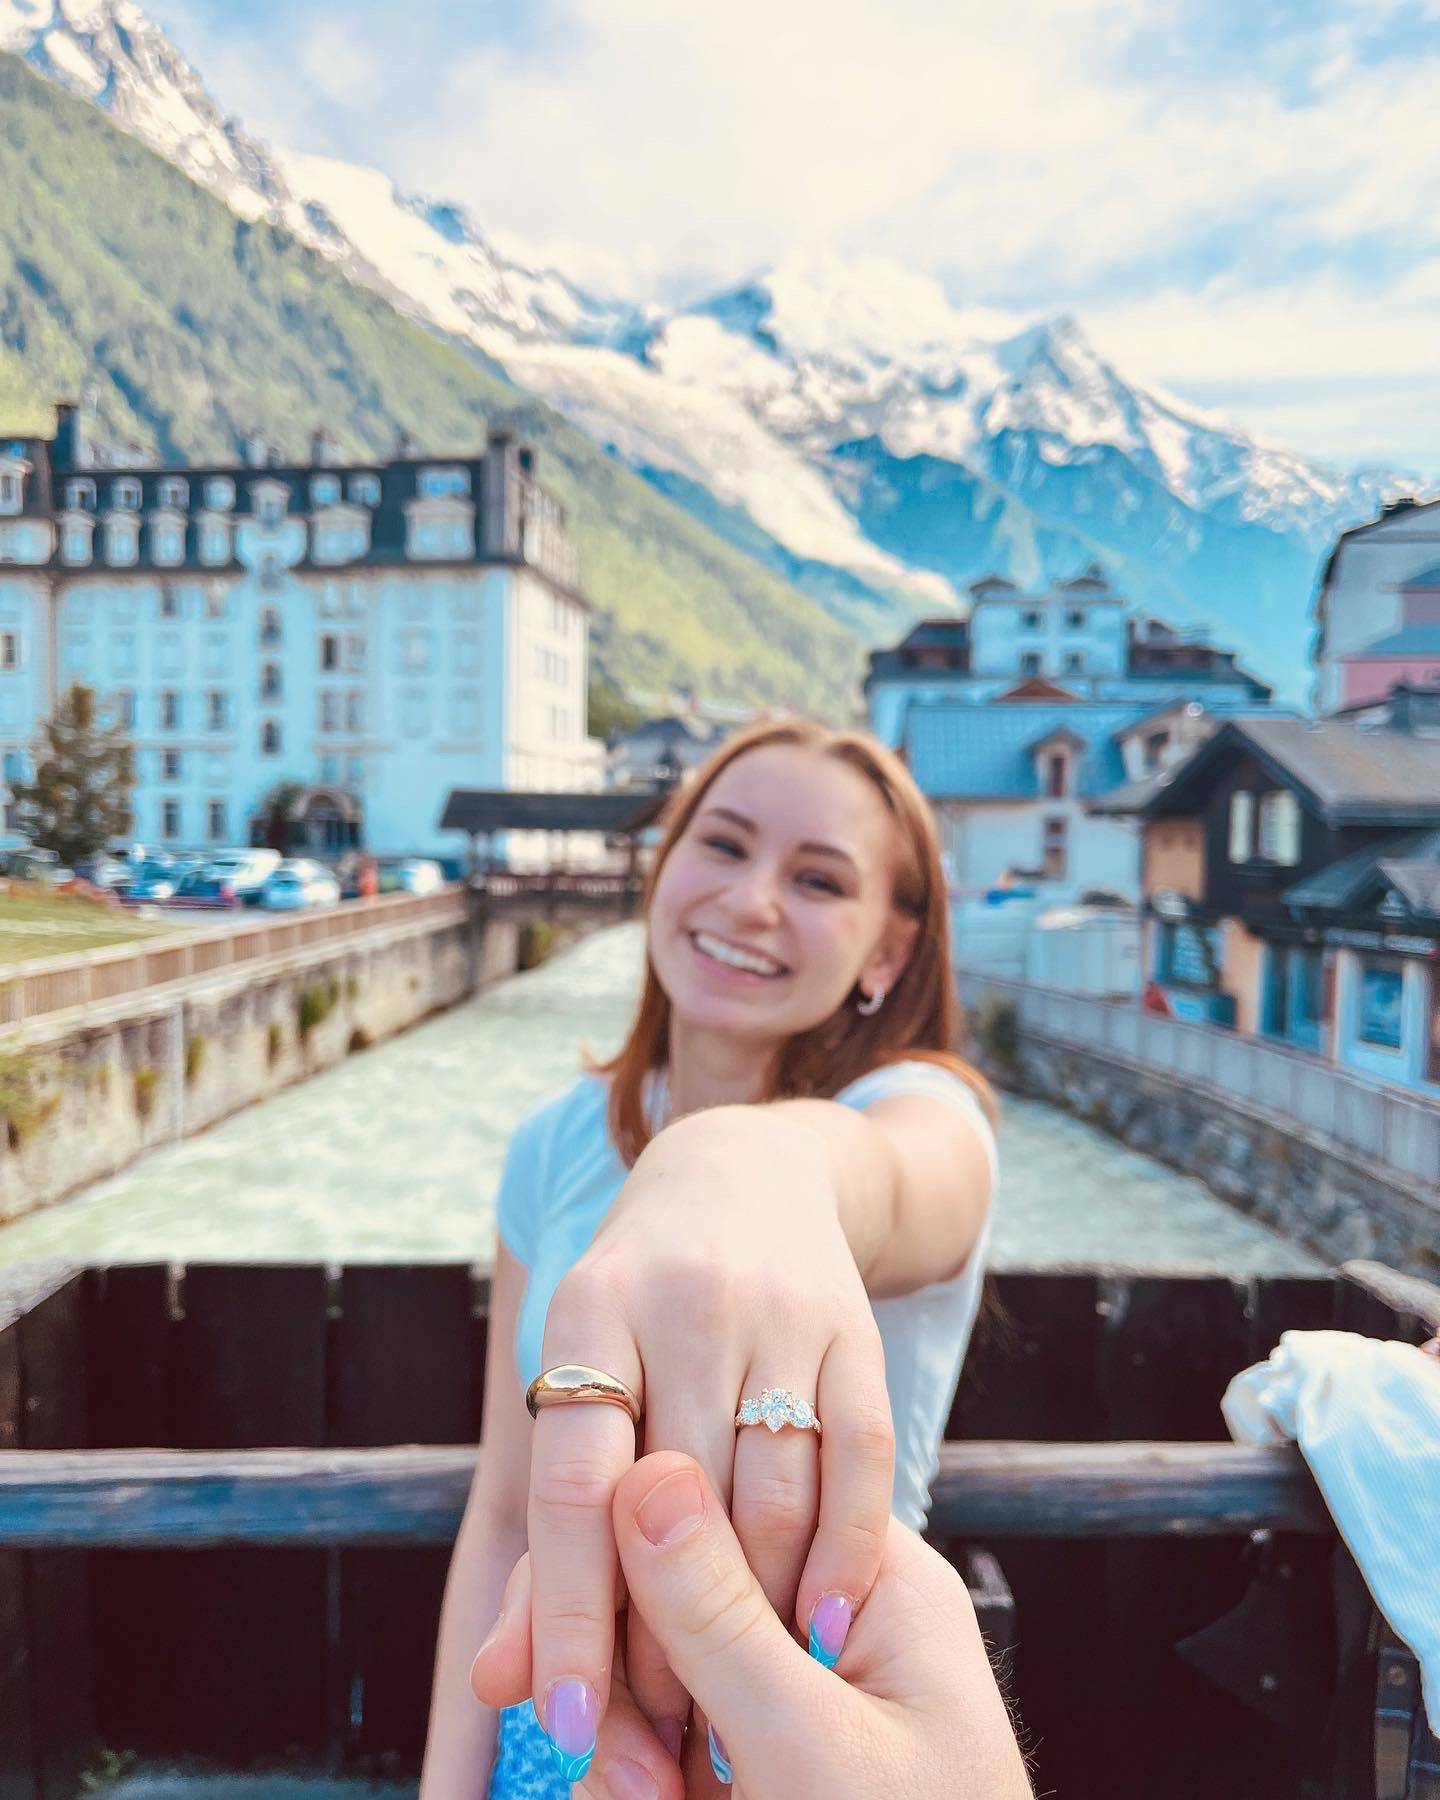 Mackenzie holding out her hand with the engagement ring